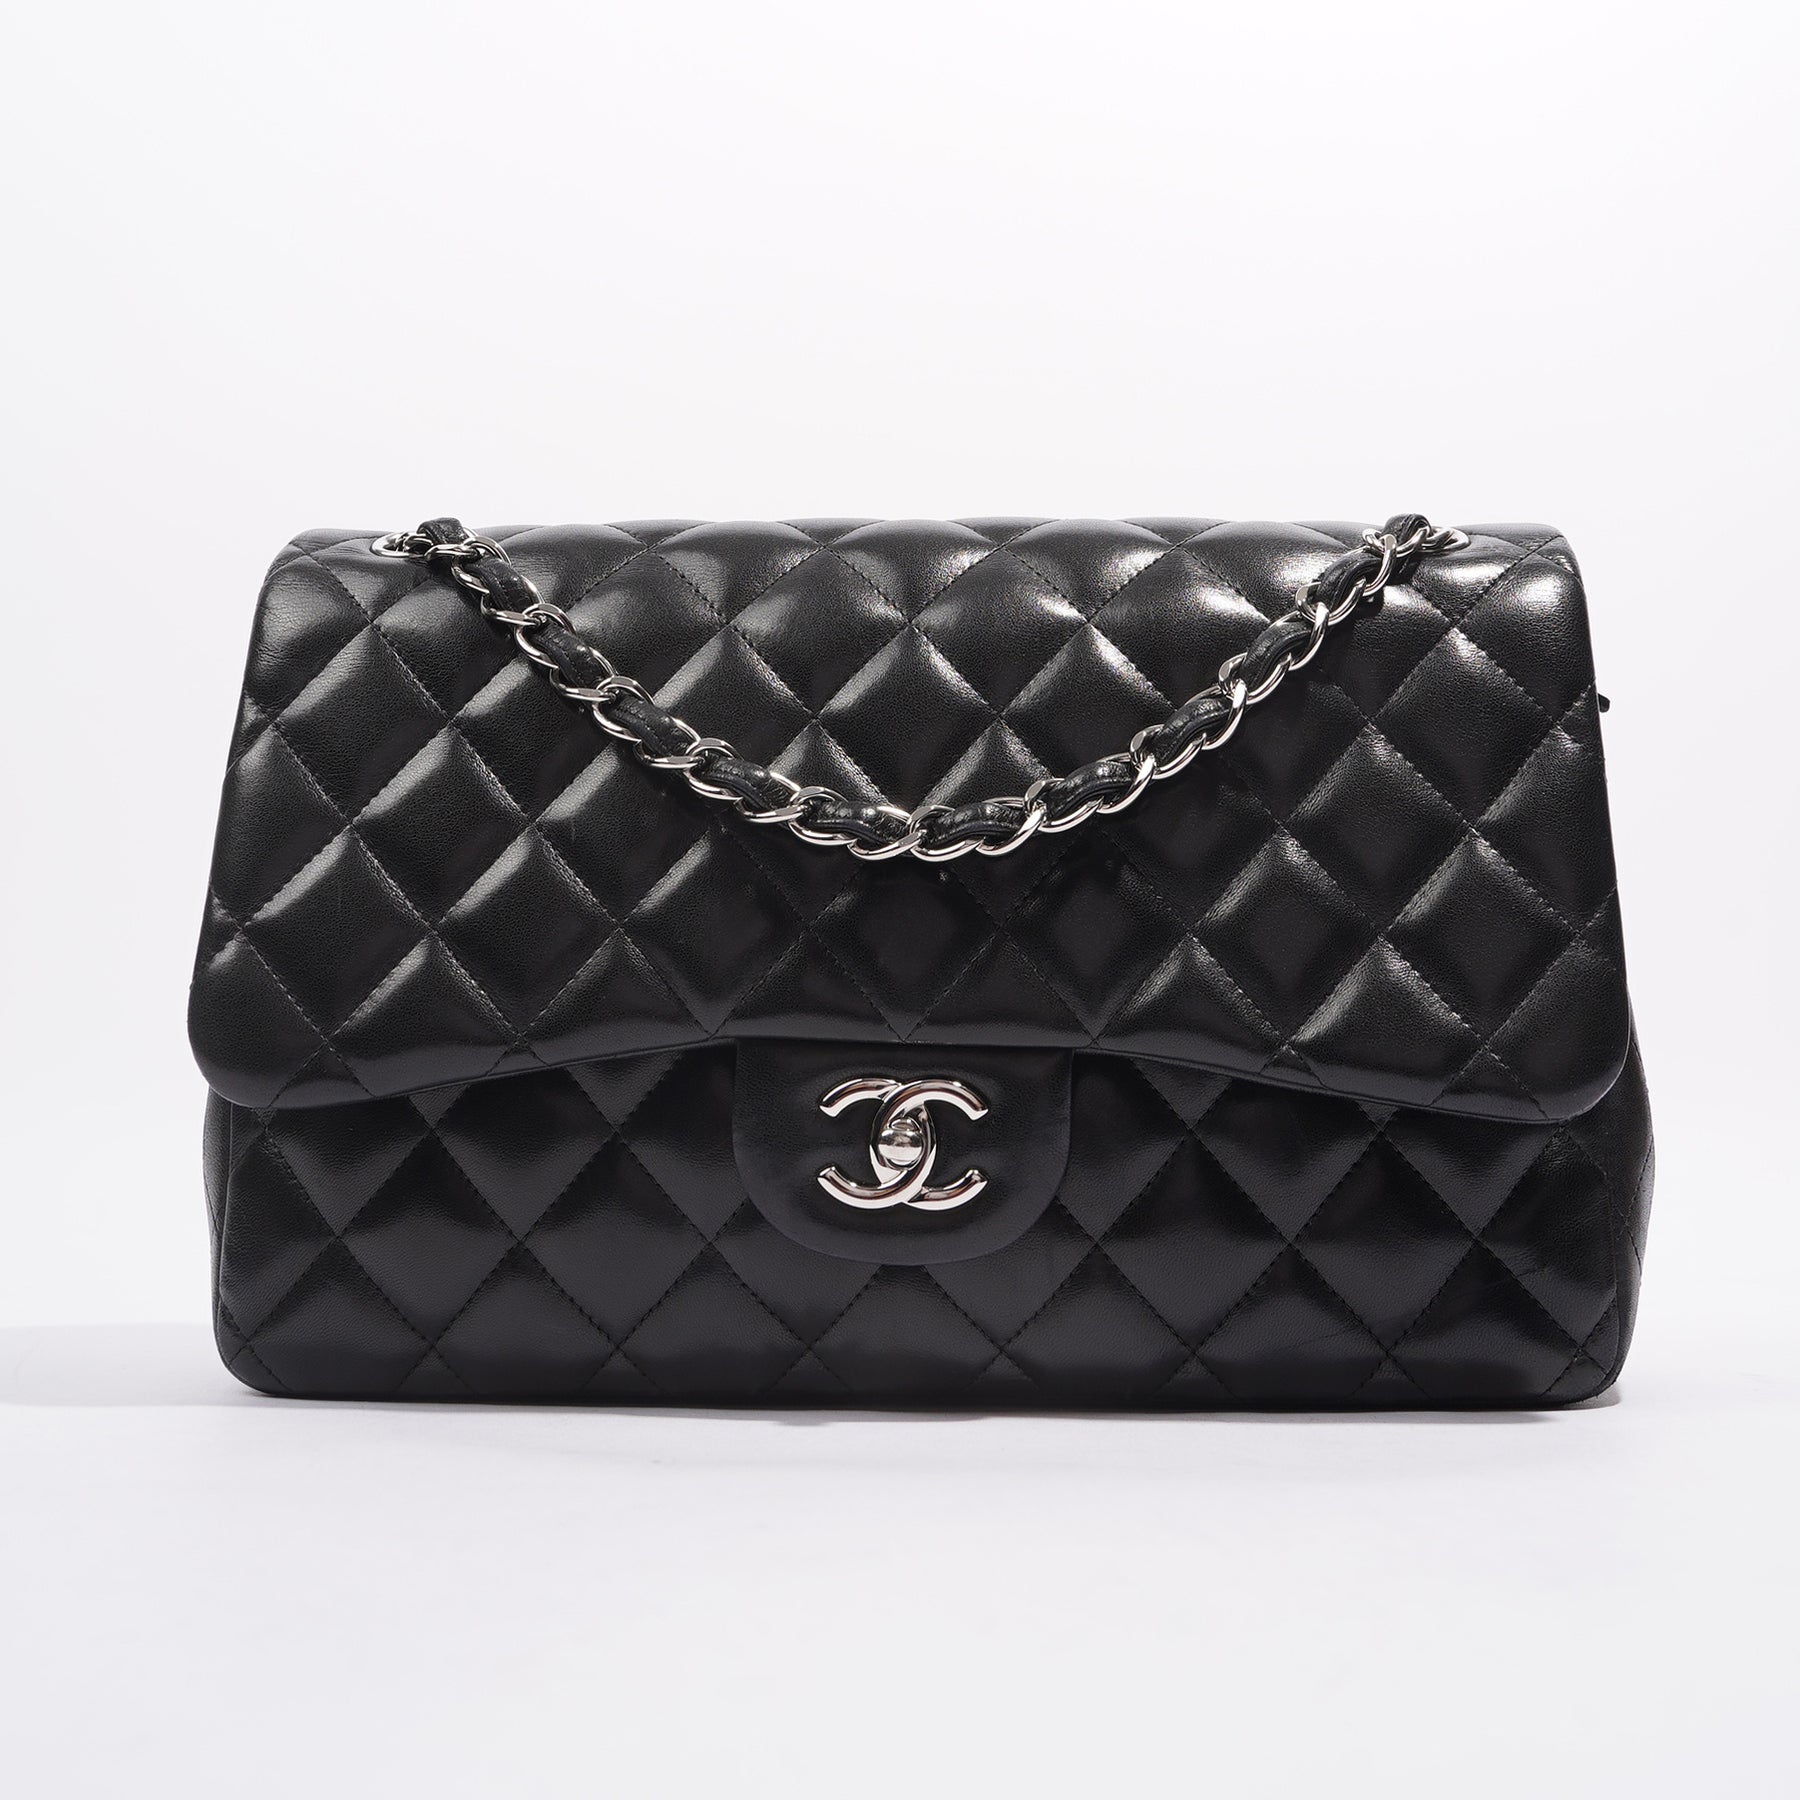 Chanel Womens Gabrielle Hobo Bag Black Lambskin Large – Luxe Collective